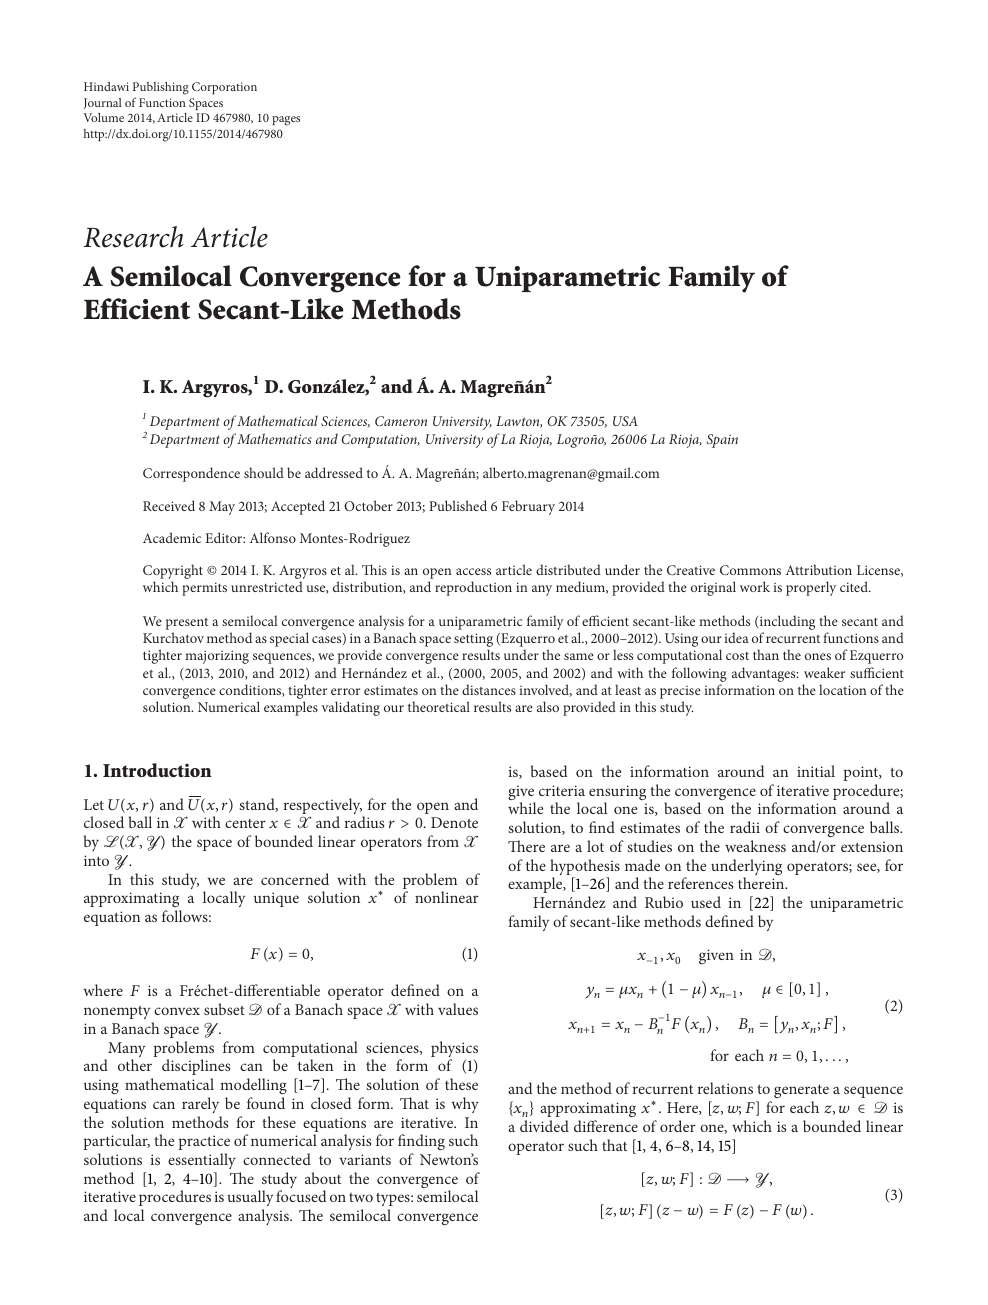 A Semilocal Convergence For A Uniparametric Family Of Efficient Secant Like Methods Topic Of Research Paper In Mathematics Download Scholarly Article Pdf And Read For Free On Cyberleninka Open Science Hub